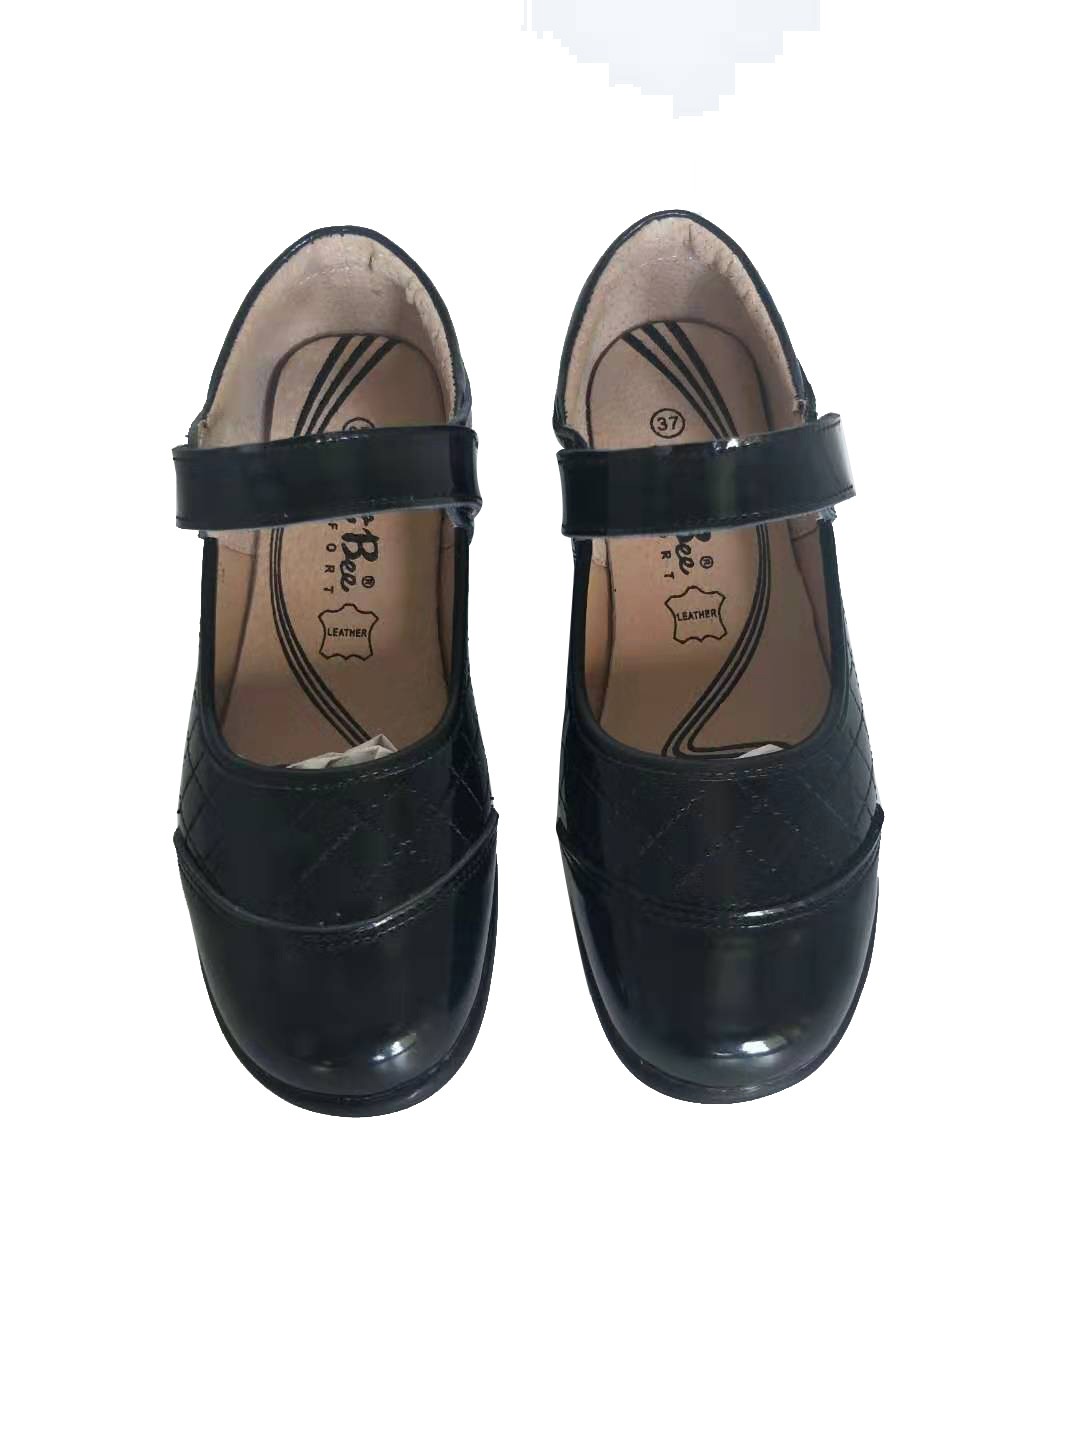 Action Leather Girl School Shoes Best Quality Comfortable Leather Black Girls Leather School Shoes Dress Shoes Manufacturers, Action Leather Girl School Shoes Best Quality Comfortable Leather Black Girls Leather School Shoes Dress Shoes Factory, Supply Action Leather Girl School Shoes Best Quality Comfortable Leather Black Girls Leather School Shoes Dress Shoes